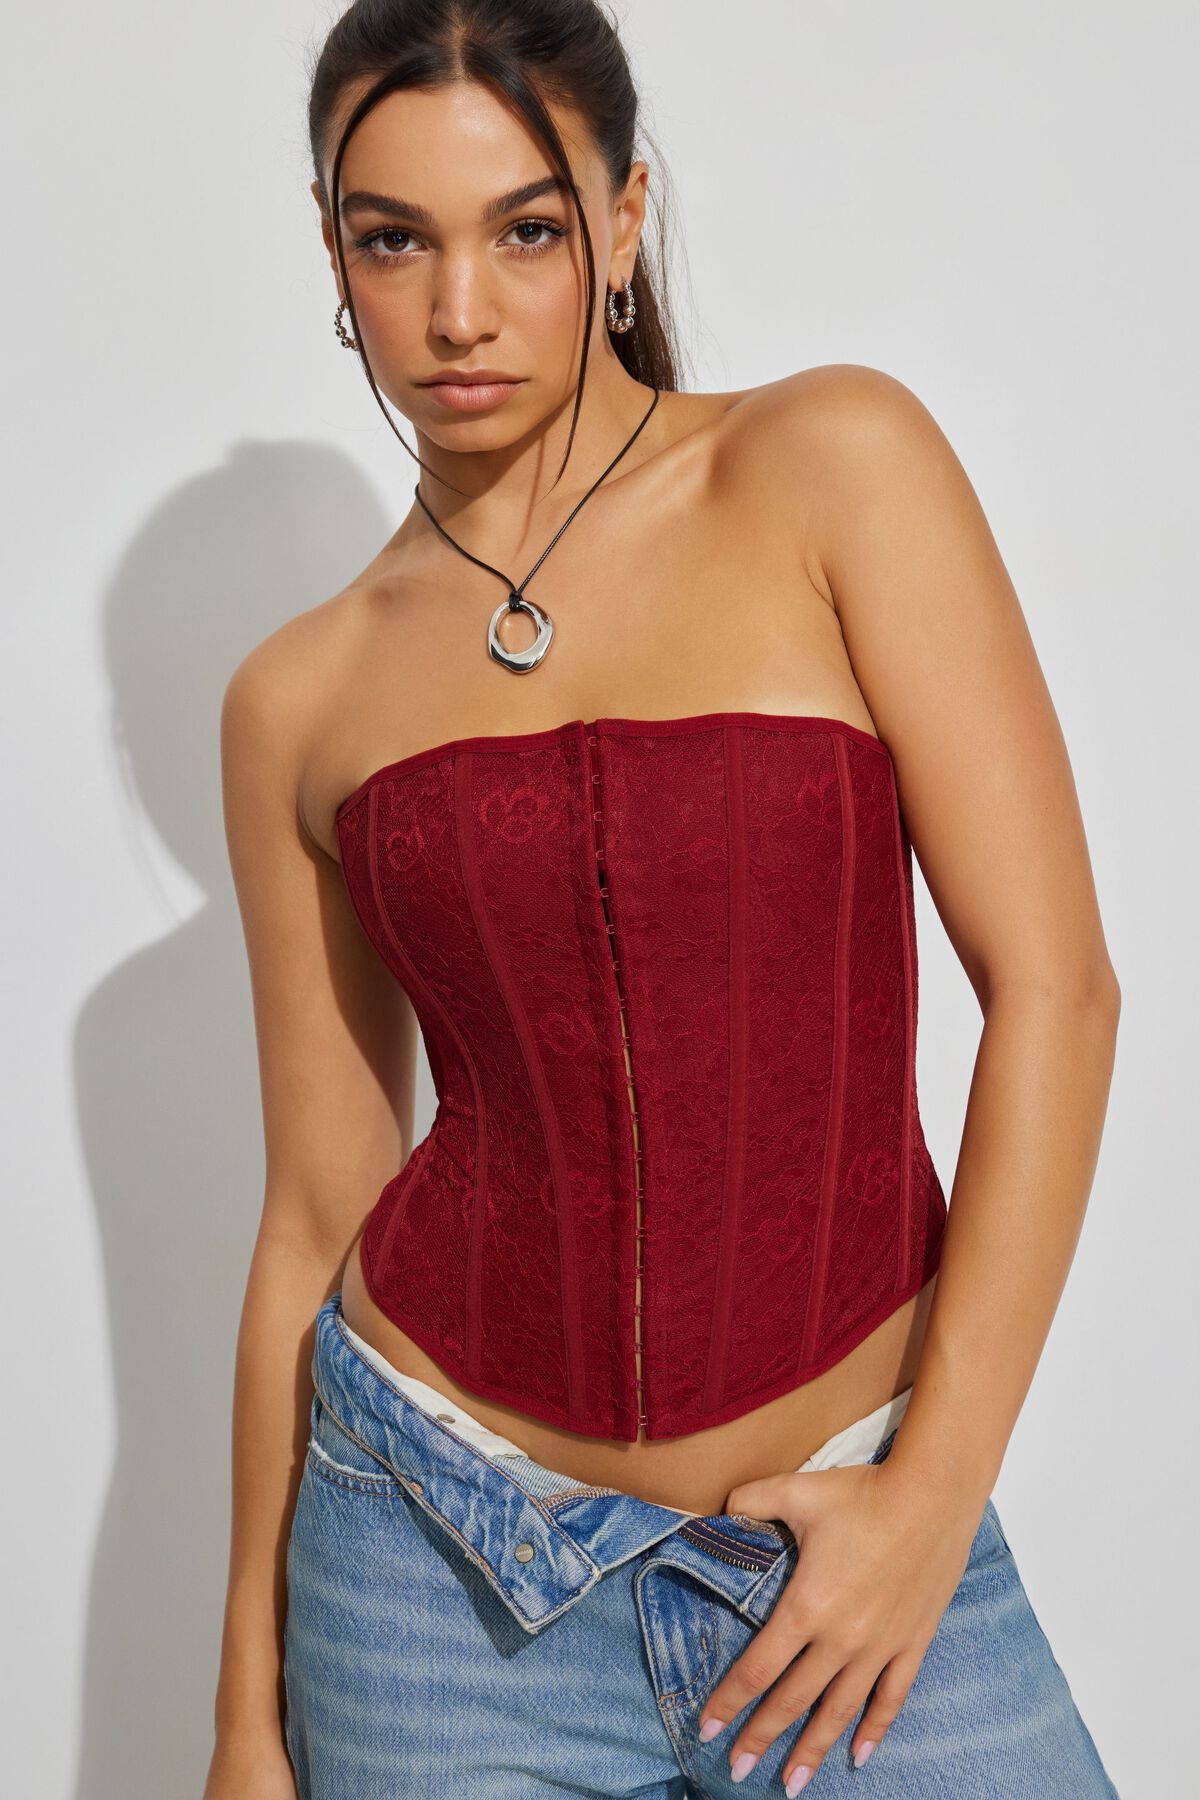 Buy Lace Strapless Corset Top - Order Bras online 1122204000